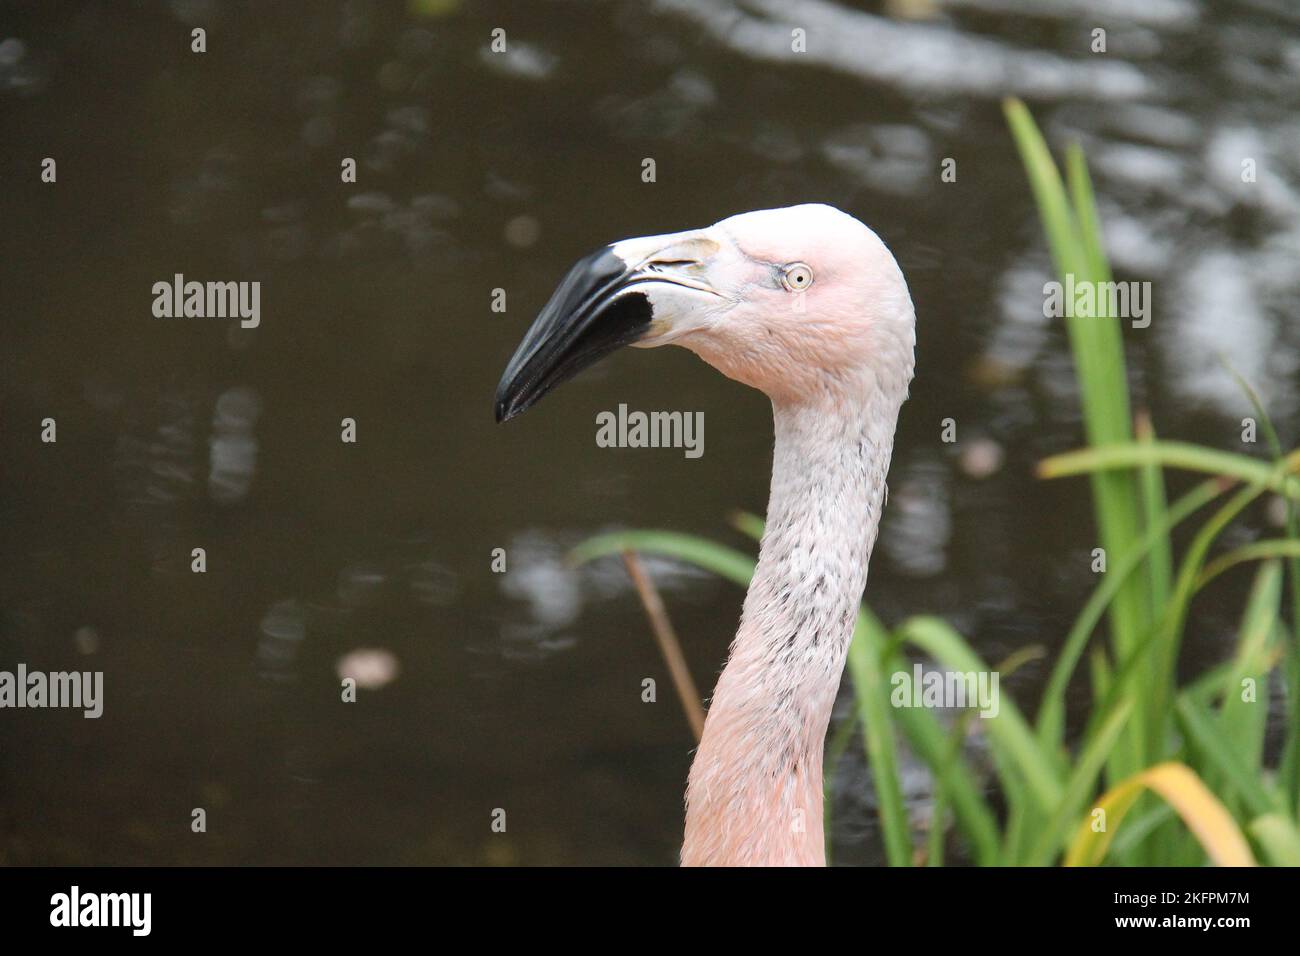 The Head of an Adult Chilean Flamingo Bird. Stock Photo